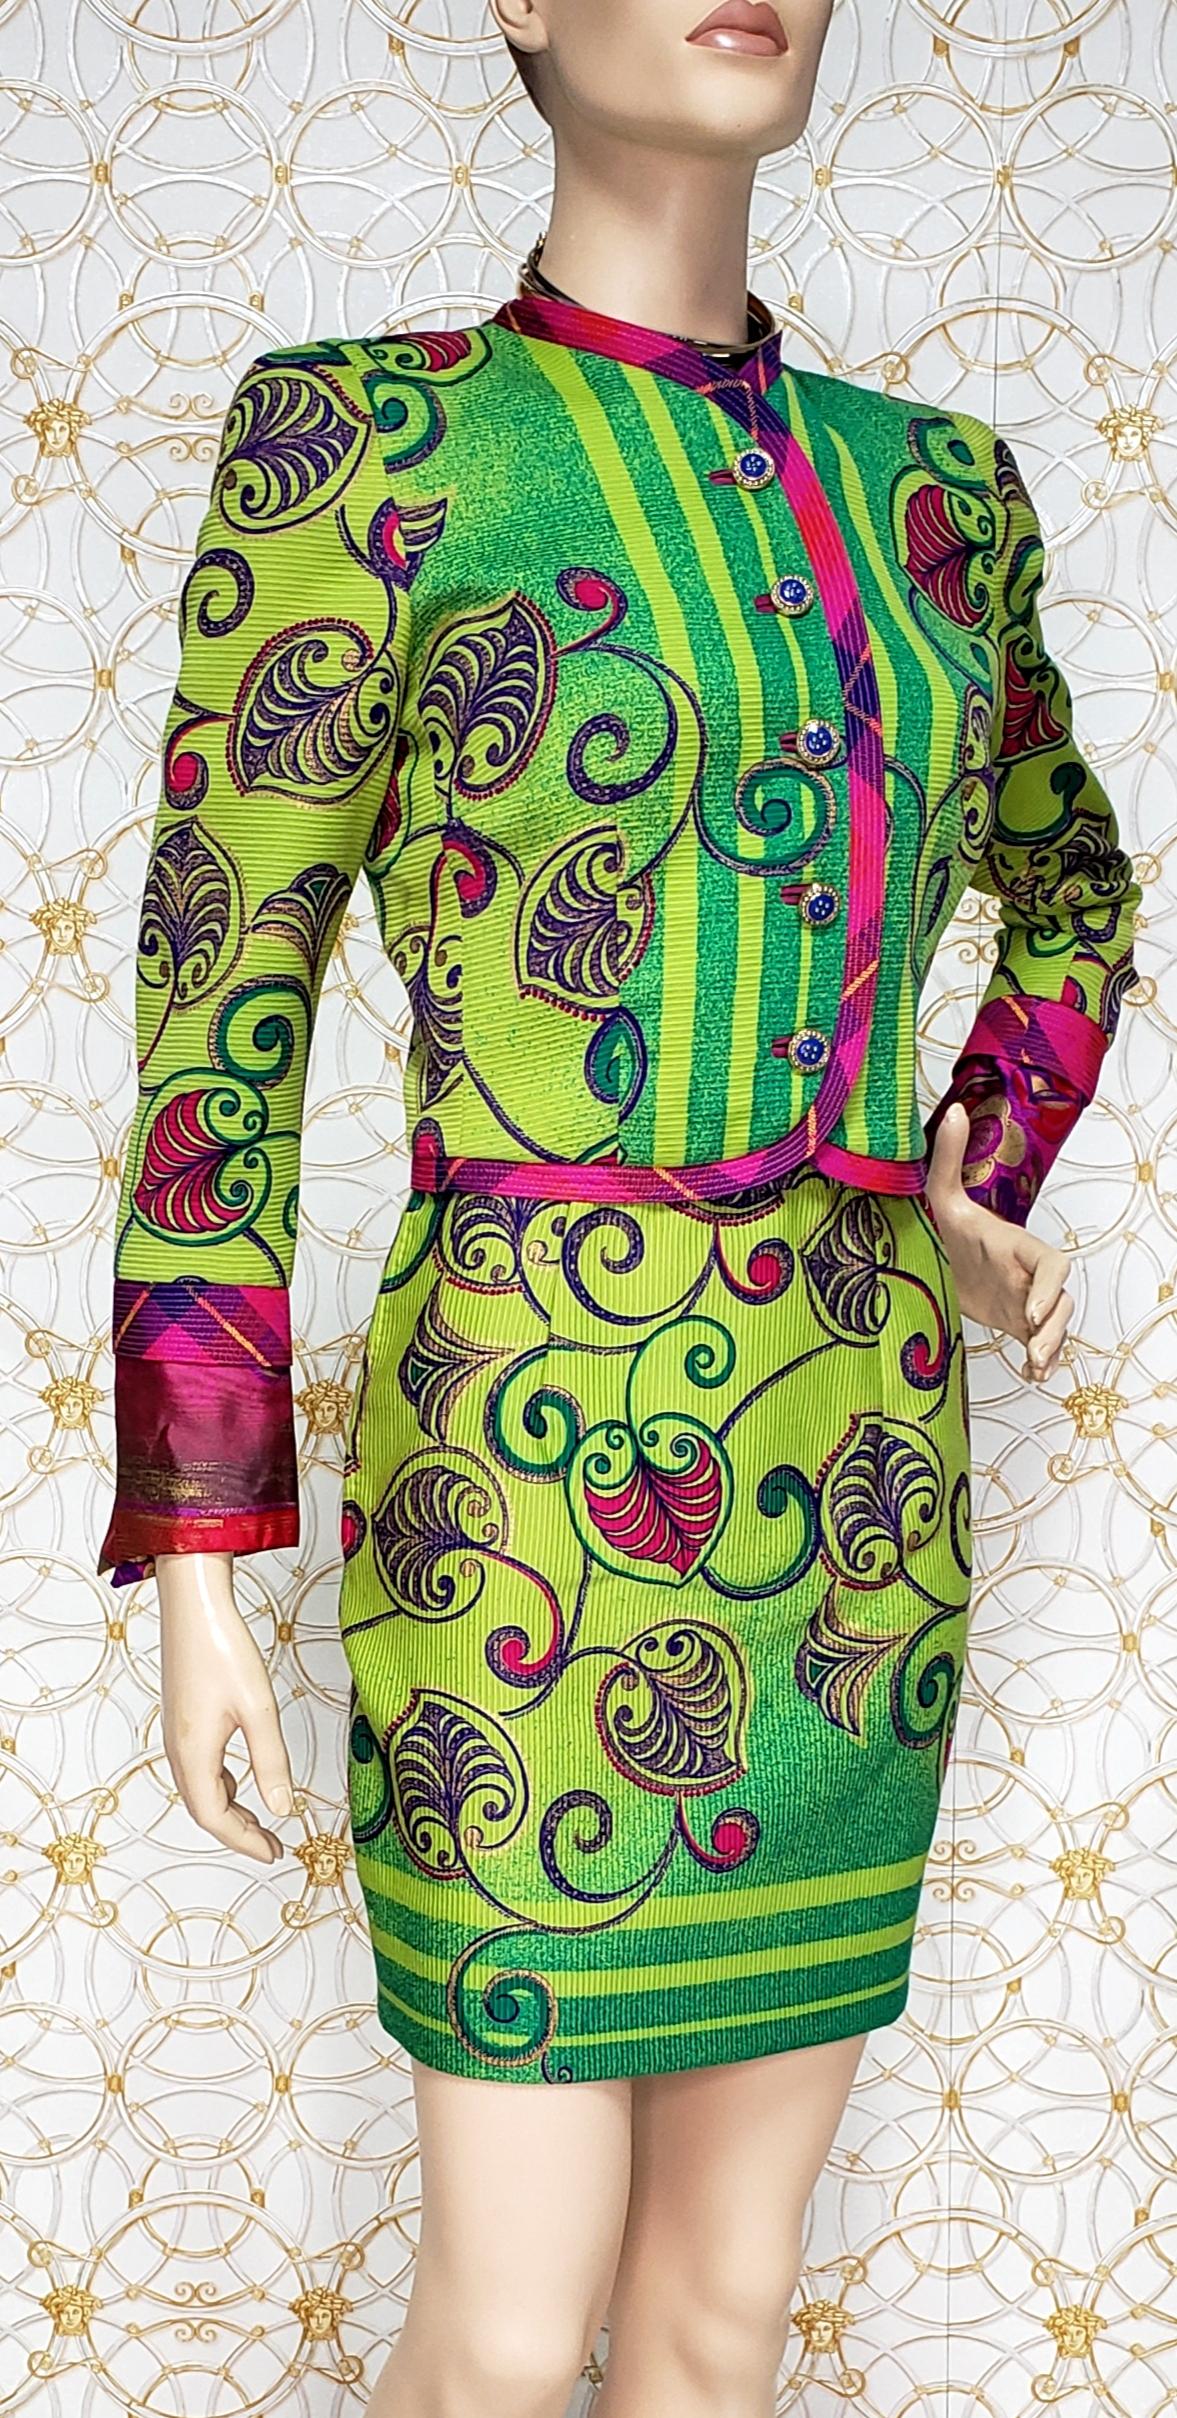 1991 GIANNI VERSACE Atelier Collection Green Vintage Jacket and Skirt Suit 4